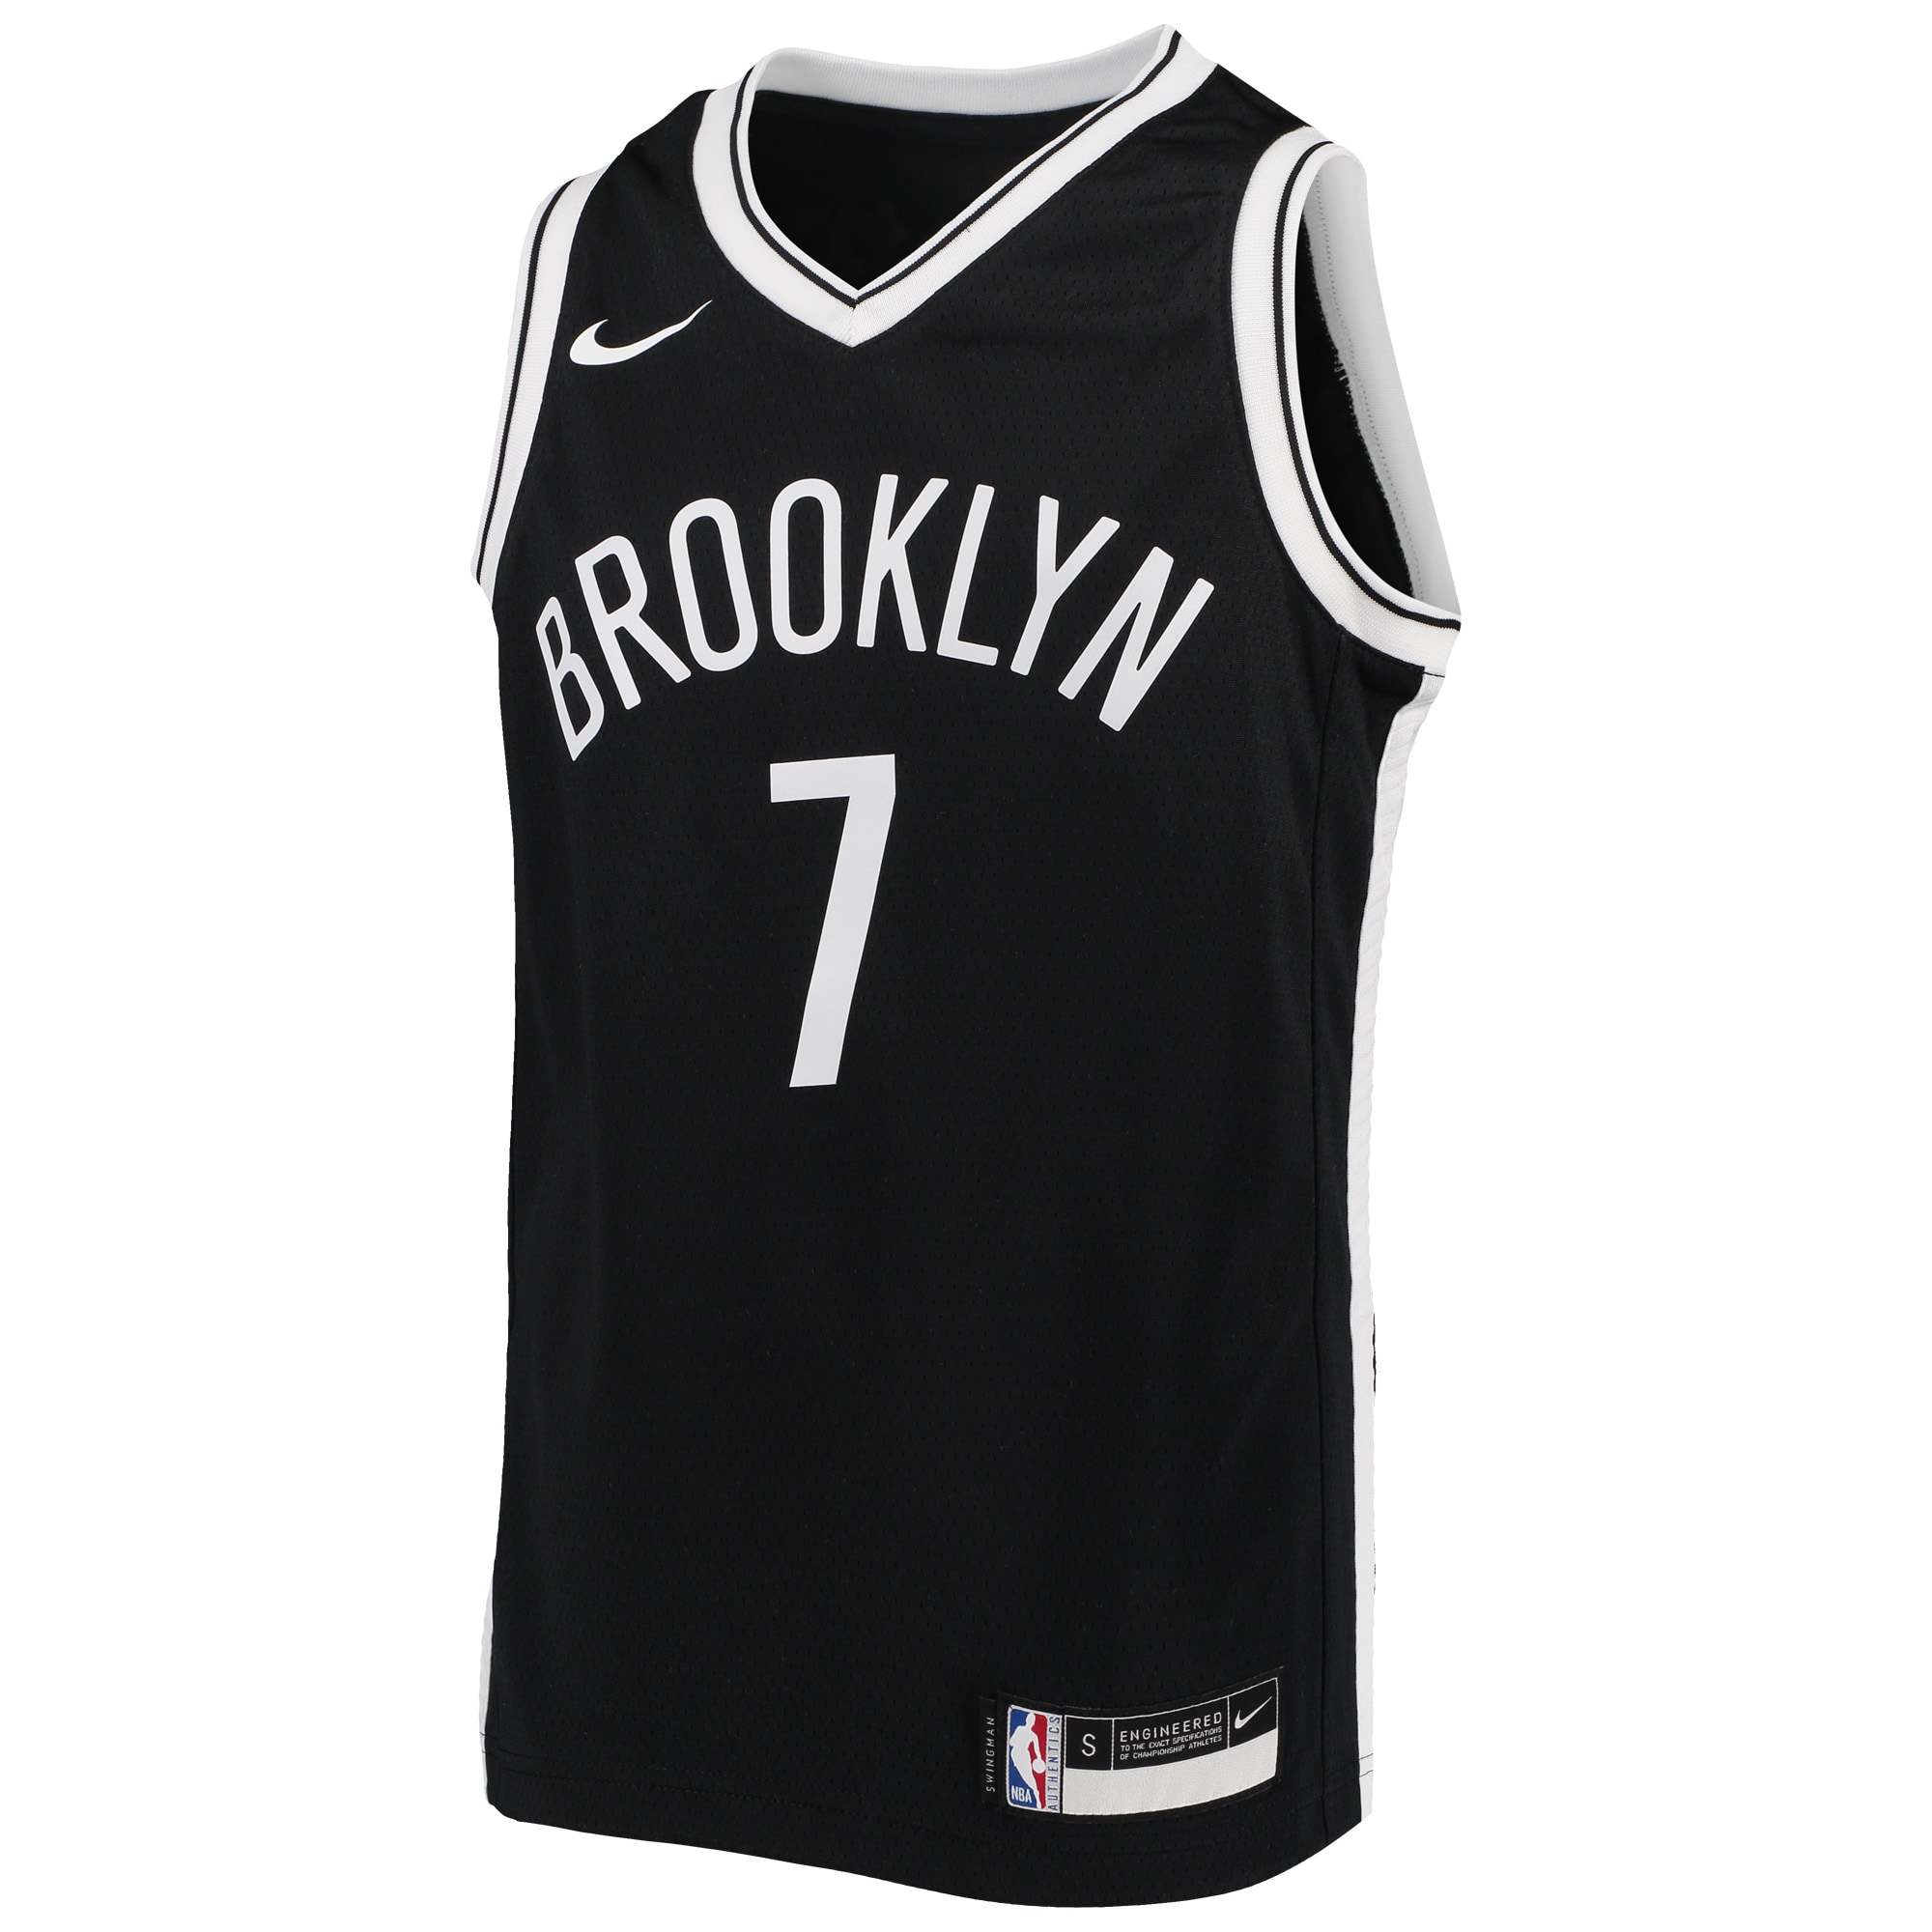 Youth Nike Kevin Durant Black Brooklyn Nets Swingman Jersey - Icon Edition - image 2 of 3